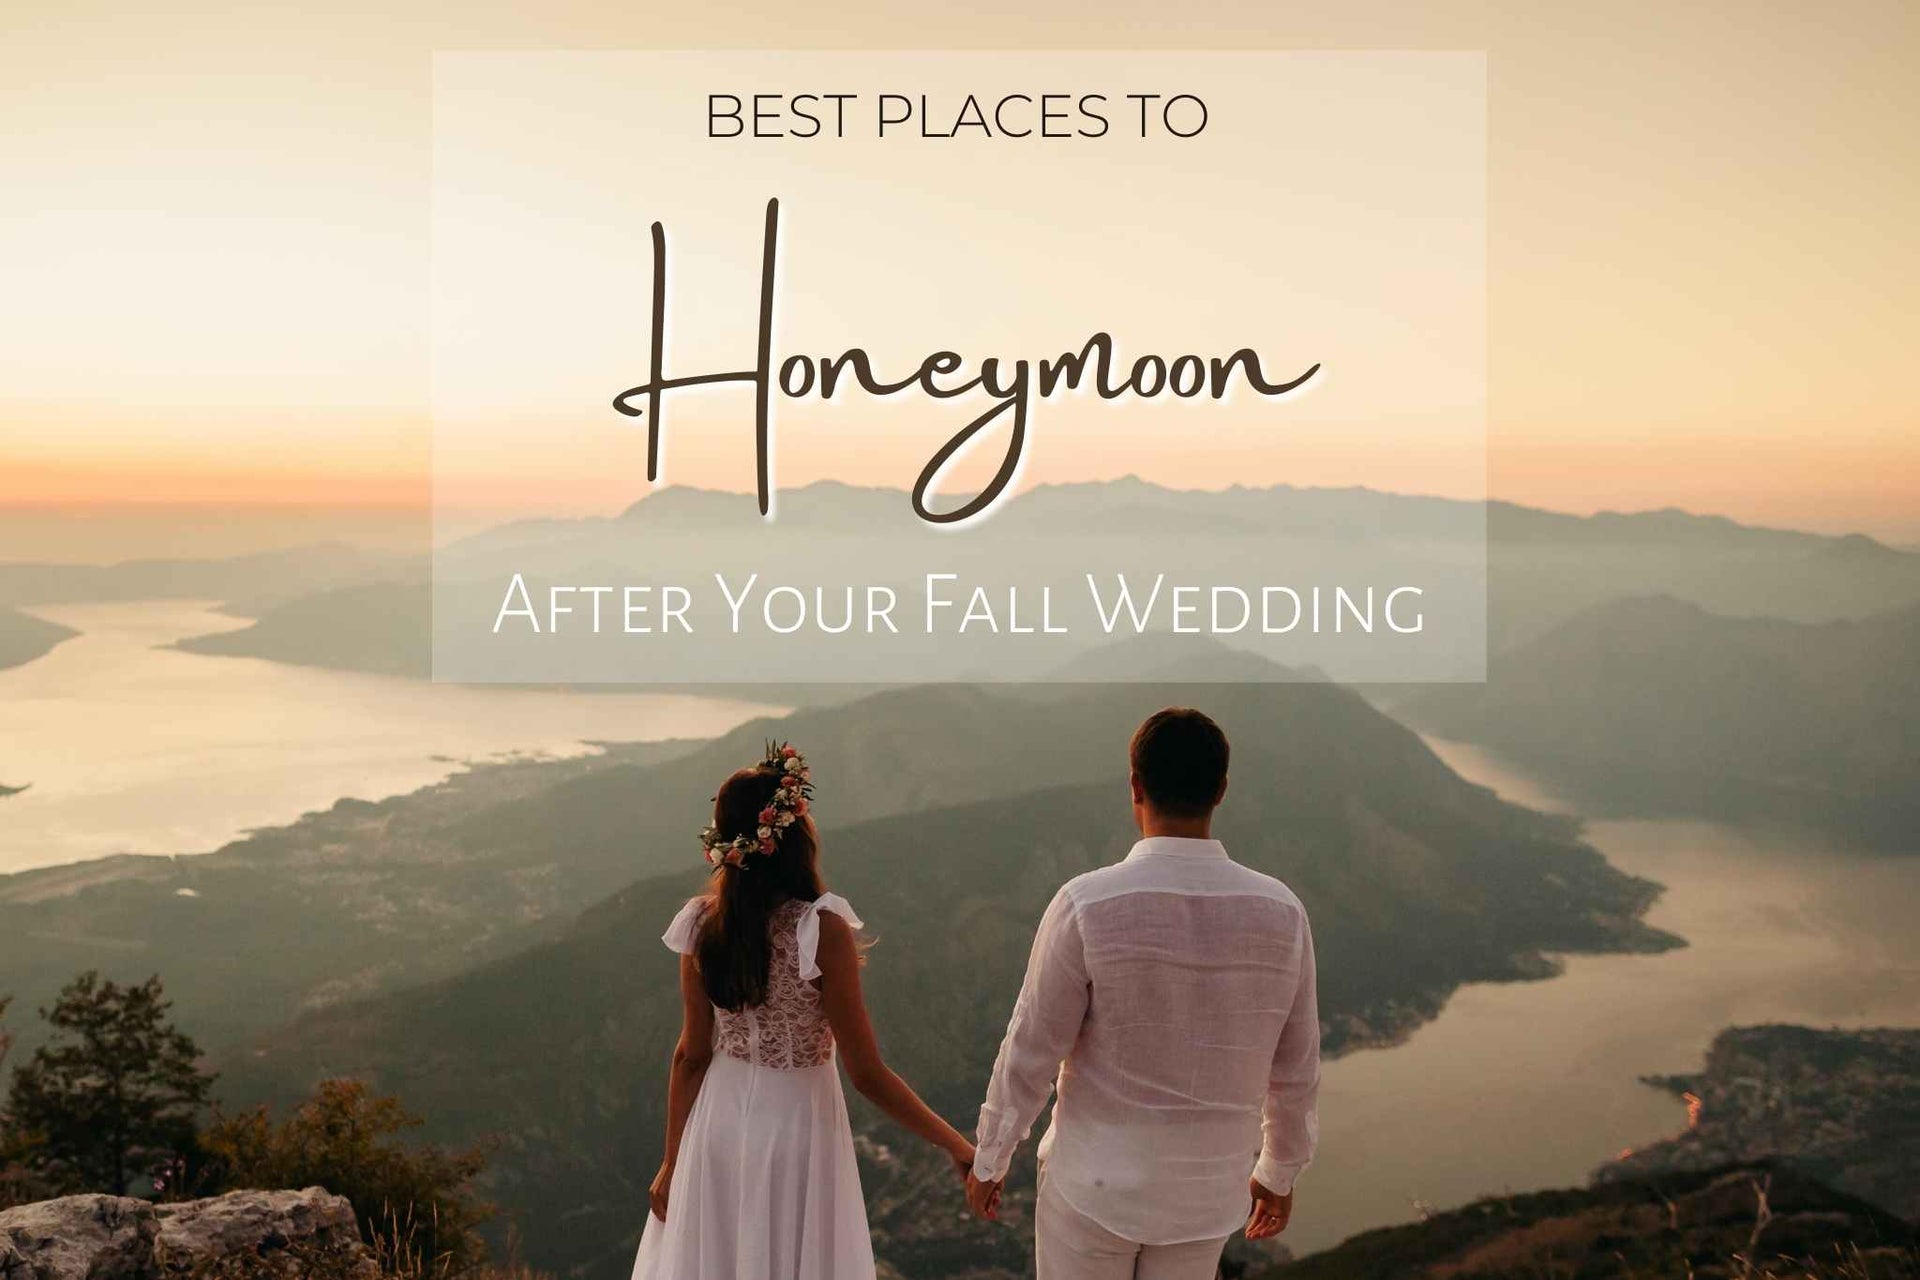 Best Places to Honeymoon After Your Fall Wedding